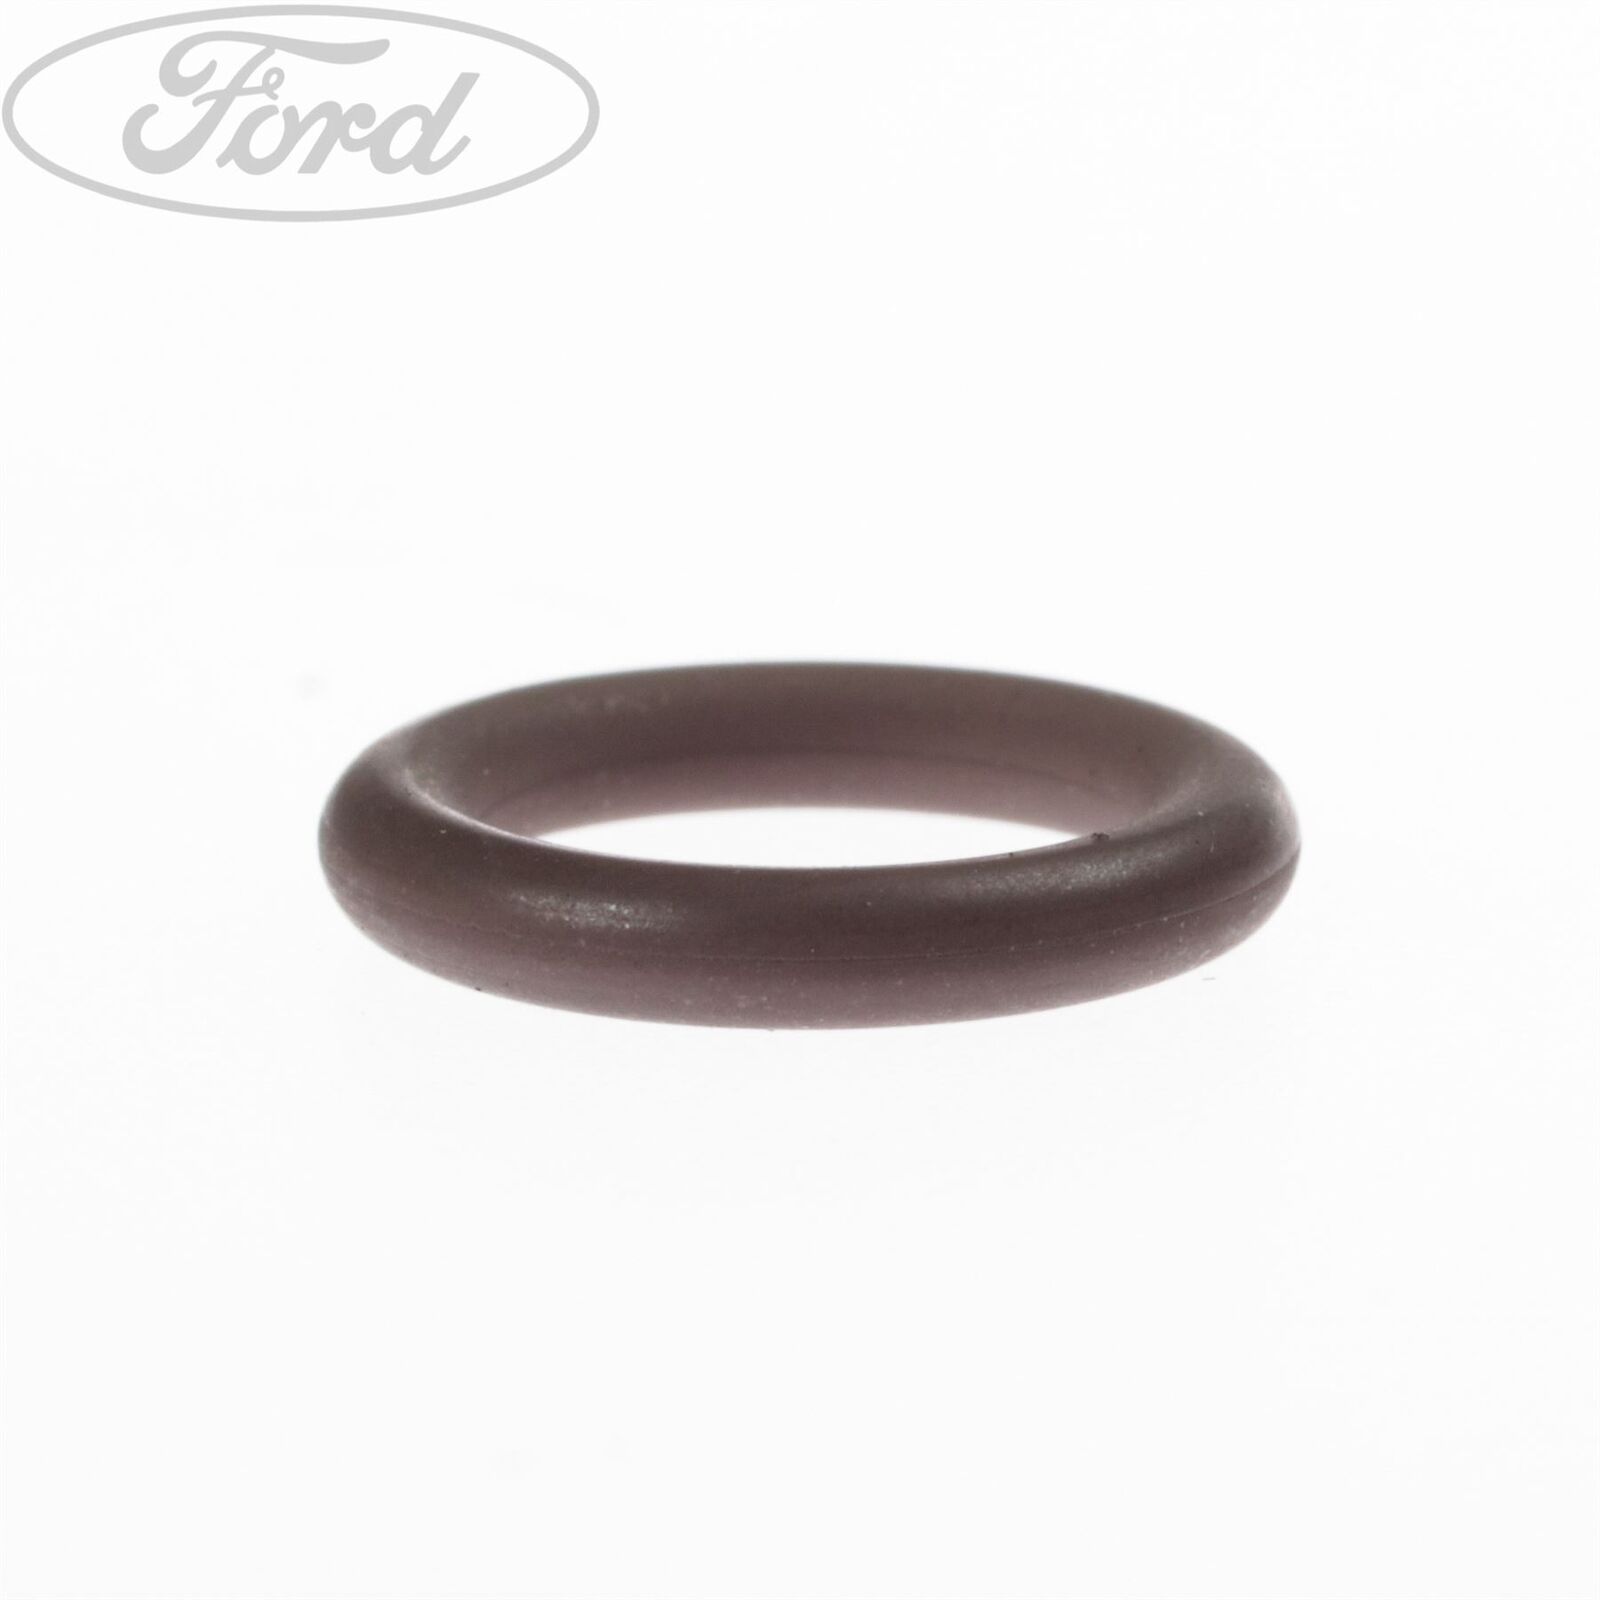 Ford 5 253 321 Ring 5253321